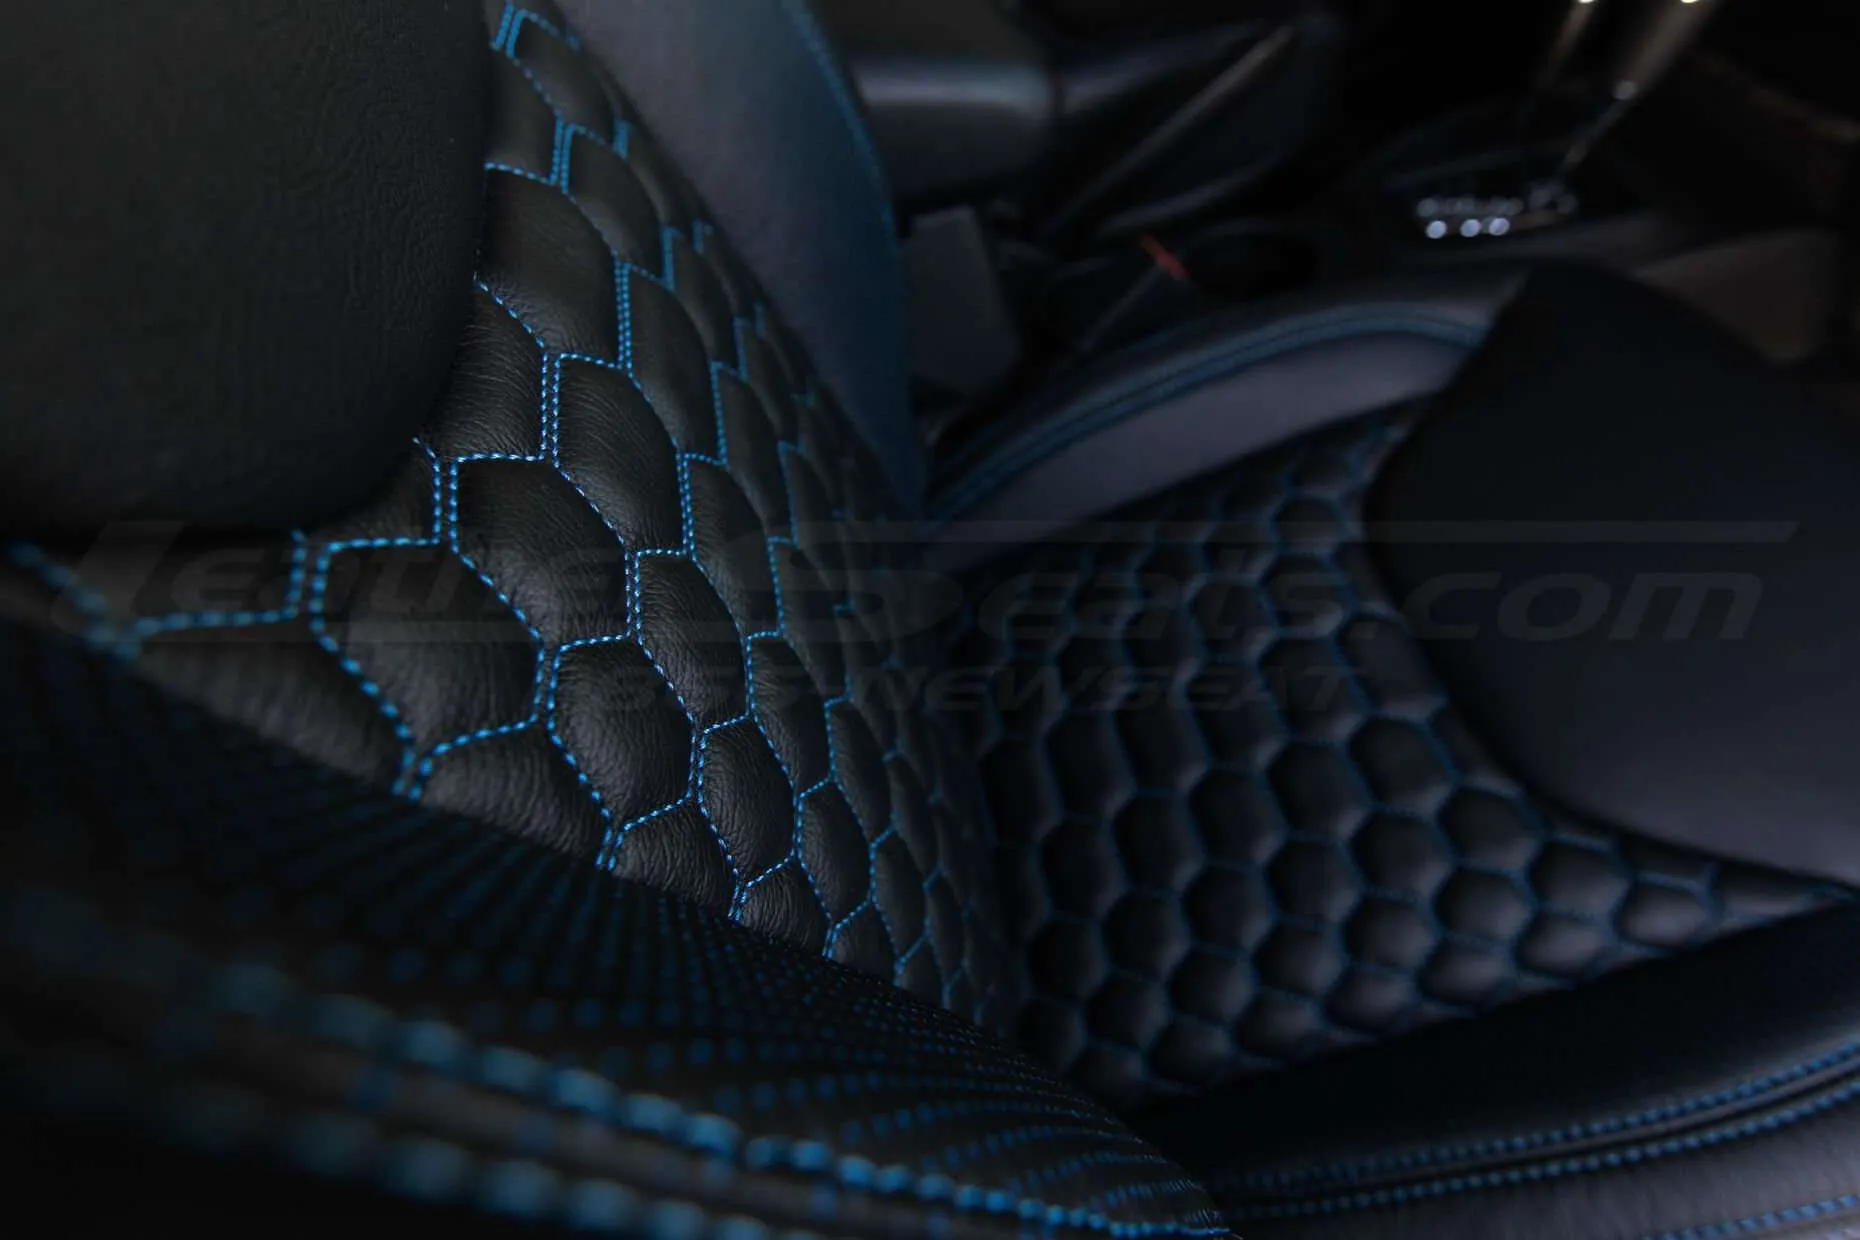 2013-2018 Jeep Wrangler Bespoked Leather Seats Installed- Black & Cobalt - Passenger seat Reticulated Hex top-down view